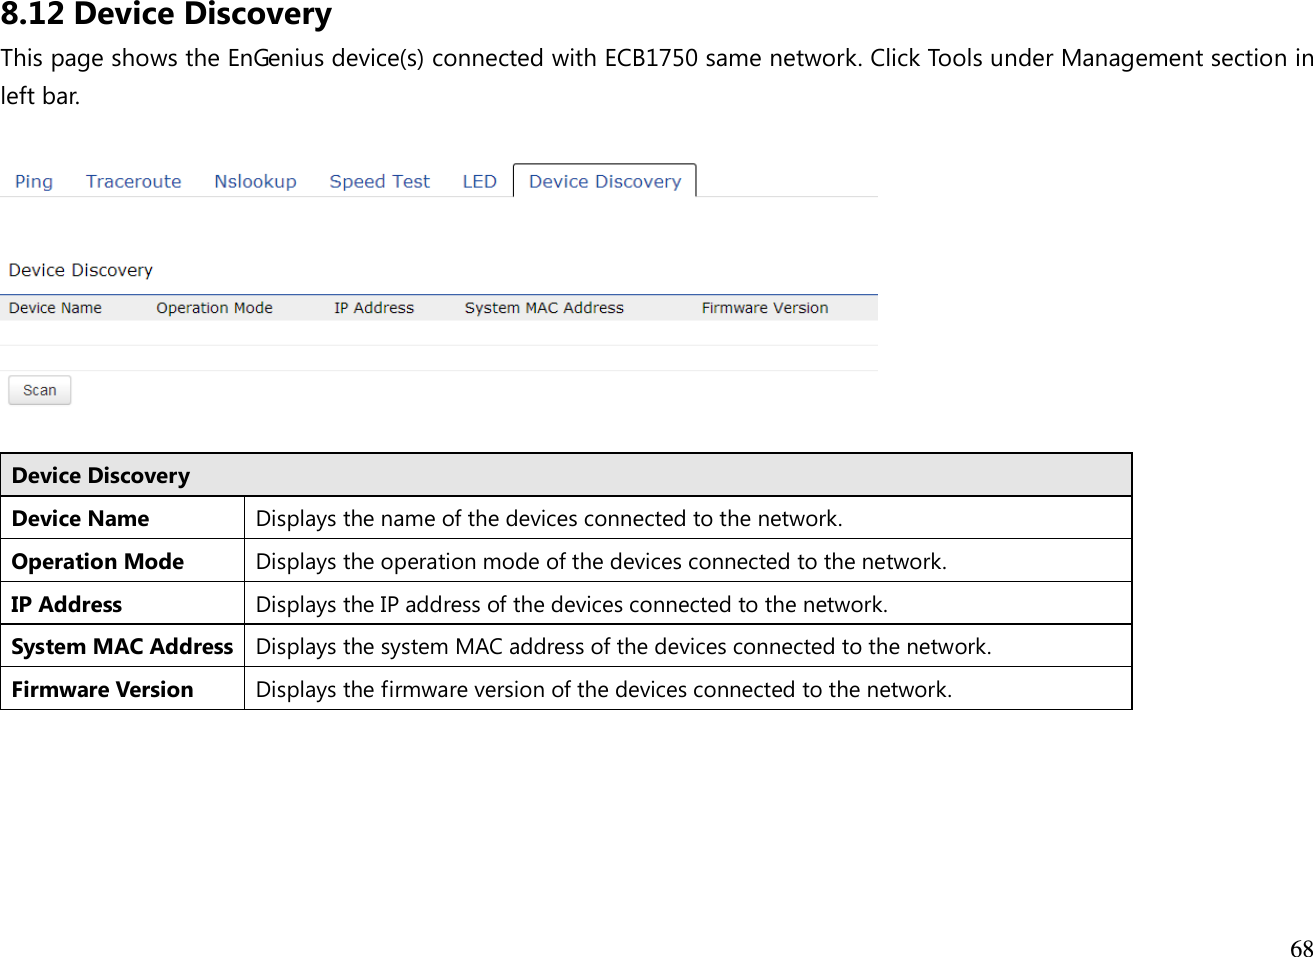  68  8.12 Device Discovery This page shows the EnGenius device(s) connected with ECB1750 same network. Click Tools under Management section in left bar.    Device Discovery Device Name Displays the name of the devices connected to the network. Operation Mode Displays the operation mode of the devices connected to the network. IP Address Displays the IP address of the devices connected to the network. System MAC Address Displays the system MAC address of the devices connected to the network. Firmware Version Displays the firmware version of the devices connected to the network.    